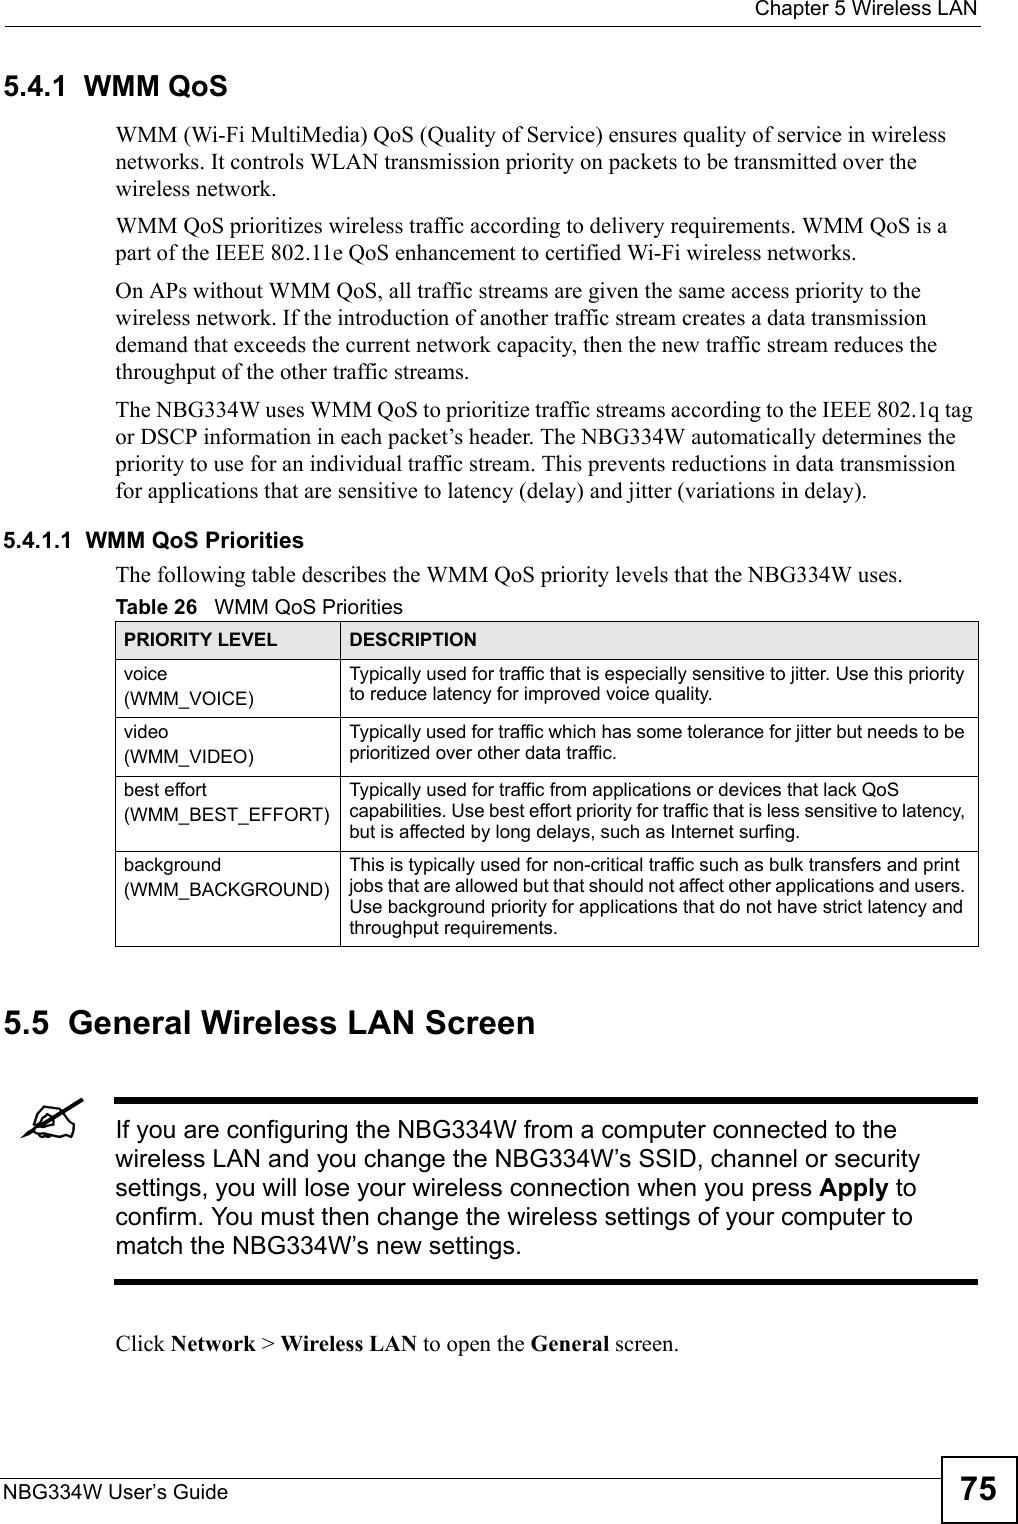  Chapter 5 Wireless LANNBG334W User’s Guide 755.4.1  WMM QoSWMM (Wi-Fi MultiMedia) QoS (Quality of Service) ensures quality of service in wireless networks. It controls WLAN transmission priority on packets to be transmitted over the wireless network.WMM QoS prioritizes wireless traffic according to delivery requirements. WMM QoS is a part of the IEEE 802.11e QoS enhancement to certified Wi-Fi wireless networks.On APs without WMM QoS, all traffic streams are given the same access priority to the wireless network. If the introduction of another traffic stream creates a data transmission demand that exceeds the current network capacity, then the new traffic stream reduces the throughput of the other traffic streams.The NBG334W uses WMM QoS to prioritize traffic streams according to the IEEE 802.1q tag or DSCP information in each packet’s header. The NBG334W automatically determines the priority to use for an individual traffic stream. This prevents reductions in data transmission for applications that are sensitive to latency (delay) and jitter (variations in delay).5.4.1.1  WMM QoS PrioritiesThe following table describes the WMM QoS priority levels that the NBG334W uses.5.5  General Wireless LAN Screen &quot;If you are configuring the NBG334W from a computer connected to the wireless LAN and you change the NBG334W’s SSID, channel or security settings, you will lose your wireless connection when you press Apply to confirm. You must then change the wireless settings of your computer to match the NBG334W’s new settings.Click Network &gt; Wireless LAN to open the General screen.Table 26   WMM QoS PrioritiesPRIORITY LEVEL DESCRIPTIONvoice(WMM_VOICE)Typically used for traffic that is especially sensitive to jitter. Use this priority to reduce latency for improved voice quality.video(WMM_VIDEO)Typically used for traffic which has some tolerance for jitter but needs to be prioritized over other data traffic.best effort(WMM_BEST_EFFORT)Typically used for traffic from applications or devices that lack QoS capabilities. Use best effort priority for traffic that is less sensitive to latency, but is affected by long delays, such as Internet surfing.background(WMM_BACKGROUND)This is typically used for non-critical traffic such as bulk transfers and print jobs that are allowed but that should not affect other applications and users. Use background priority for applications that do not have strict latency and throughput requirements.